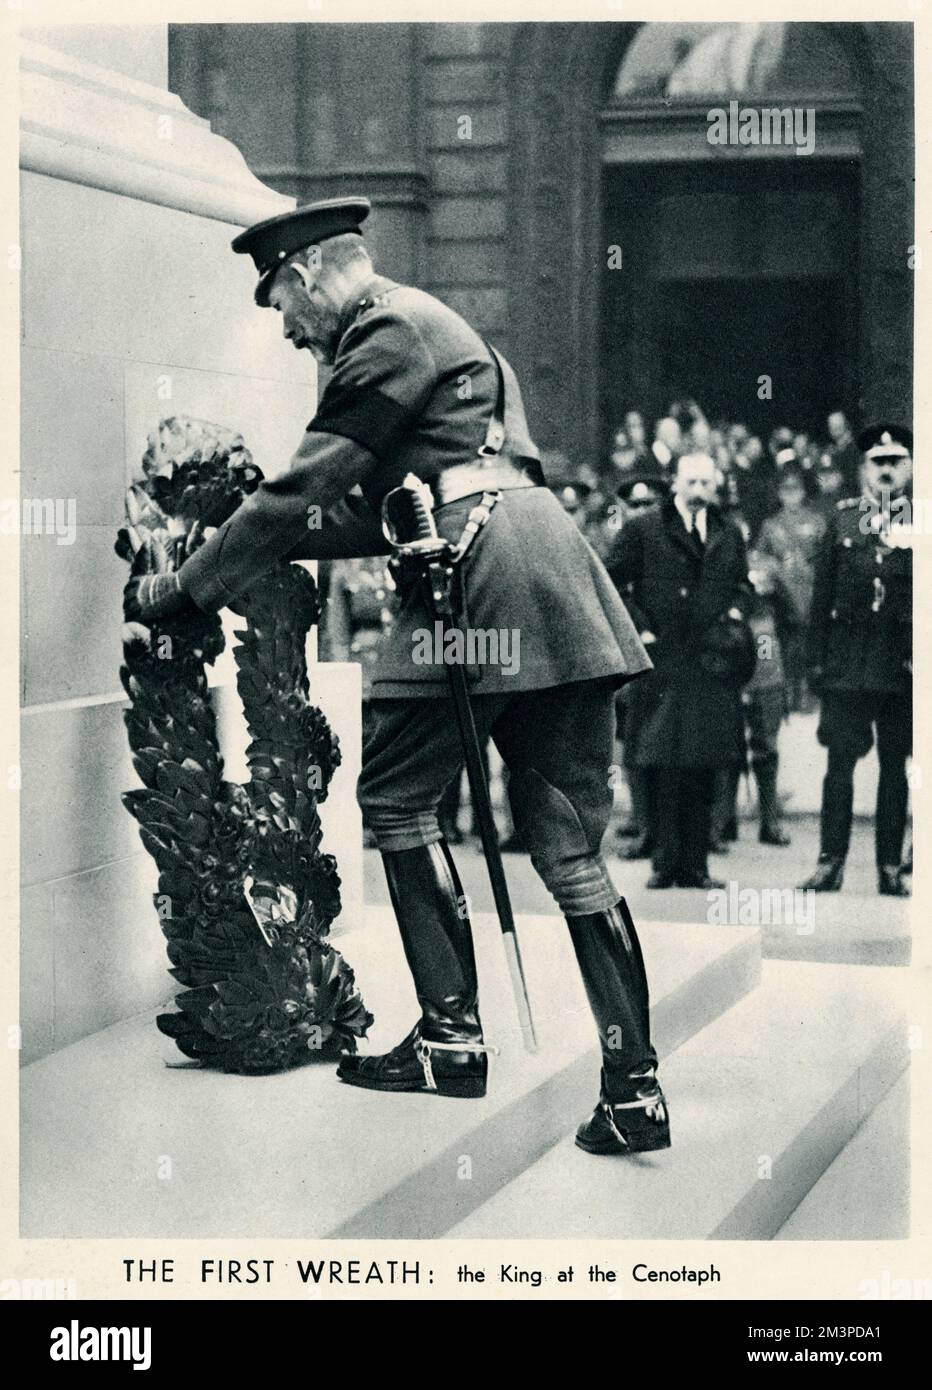 On 11th November 1919, the first anniversary of Armistice day, the Britsh nation, in reponse to an invitation by King George V, stood in silence for two minutes at 11 o'clock in remembrance of all who had given their lives in the First World War. Here is a photograph of King George V, laying a wreath at cenotaph a monument erected in honour of people whose remains are elsewhere, located in Whitehall, London.   11 November 1919 Stock Photo